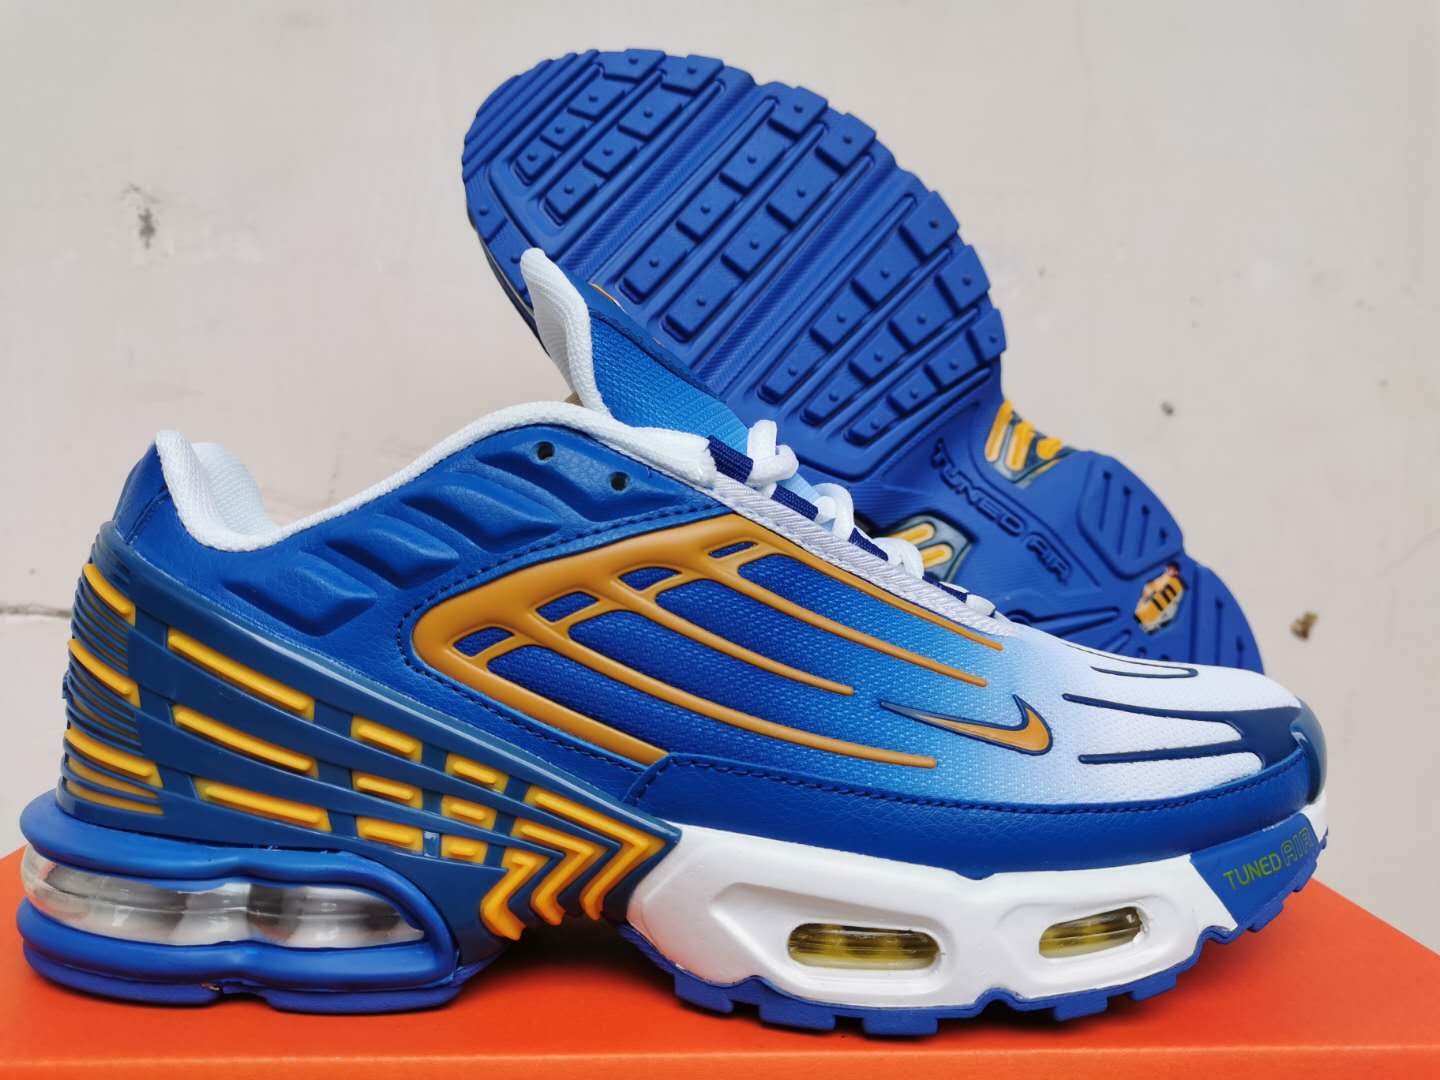 Men's Hot sale Running weapon Air Max TN Shoes 067